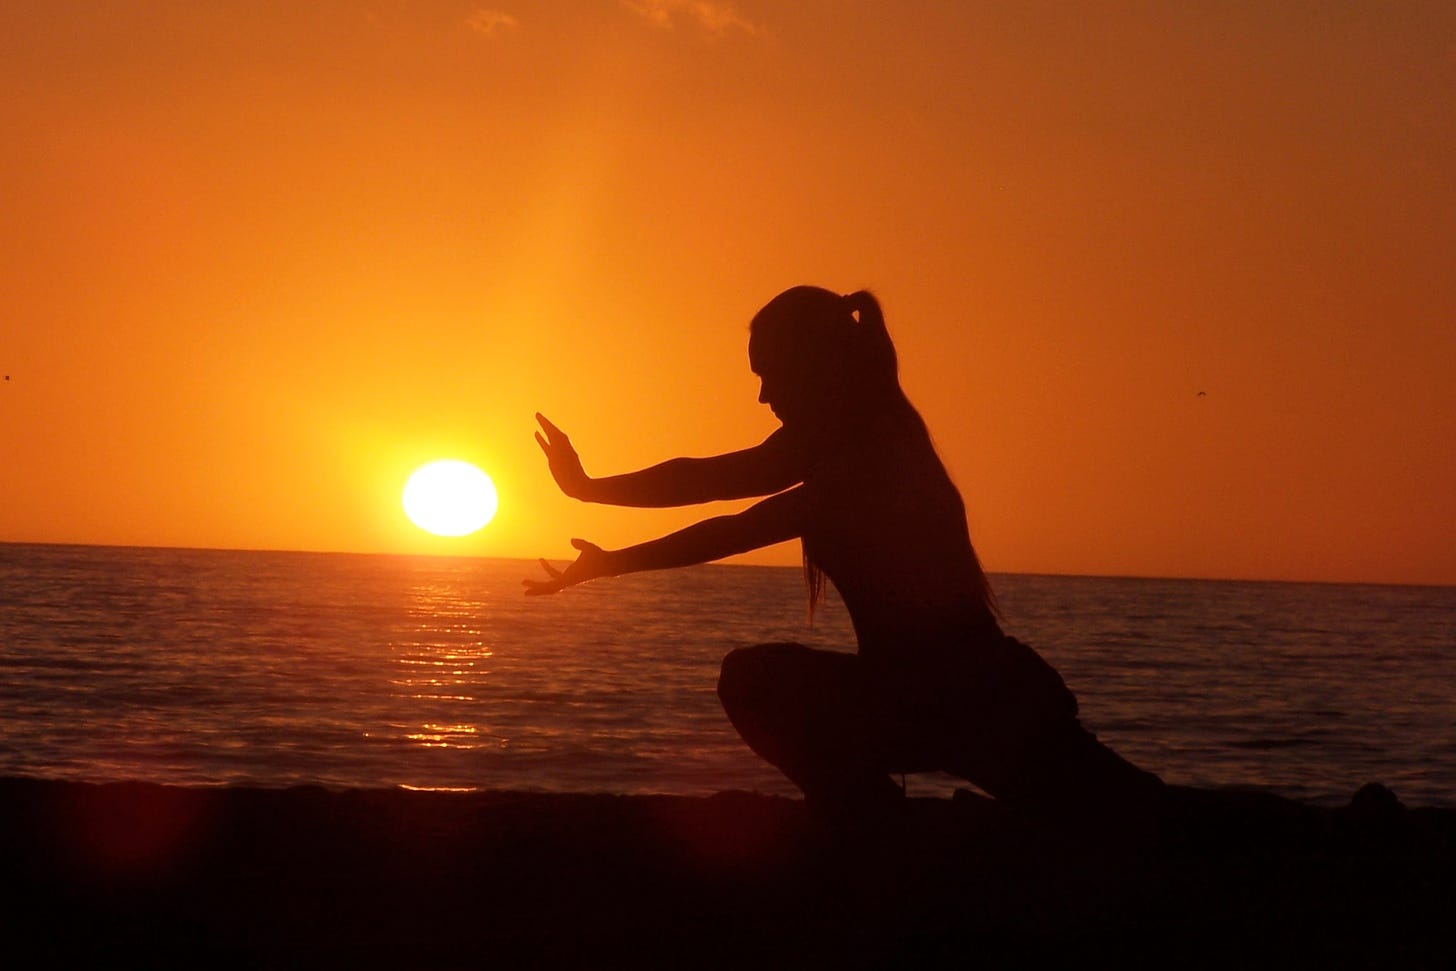 Silhouette of a woman in a deep martial lunge along the beach at sunset. Is she capturing the sun? Or is it shooting from her outstretched hands?